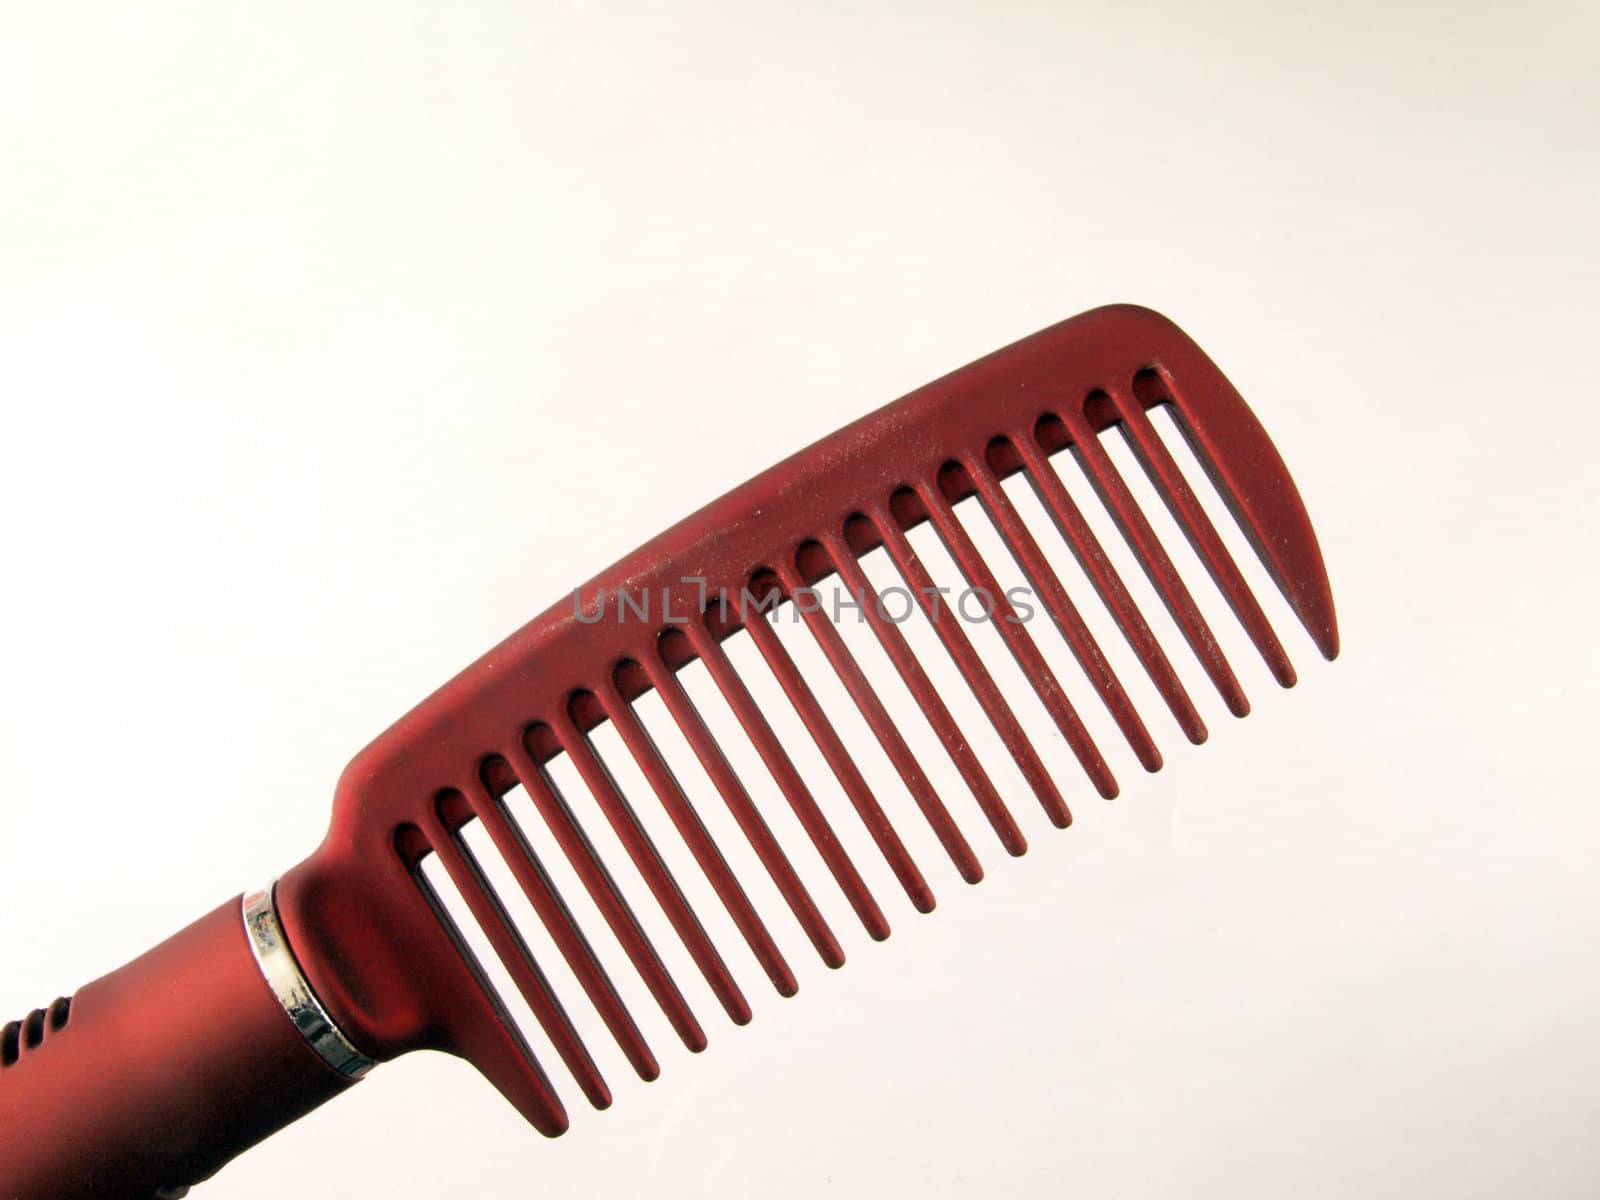 Close-up of a plastic comb used for hairstyling.